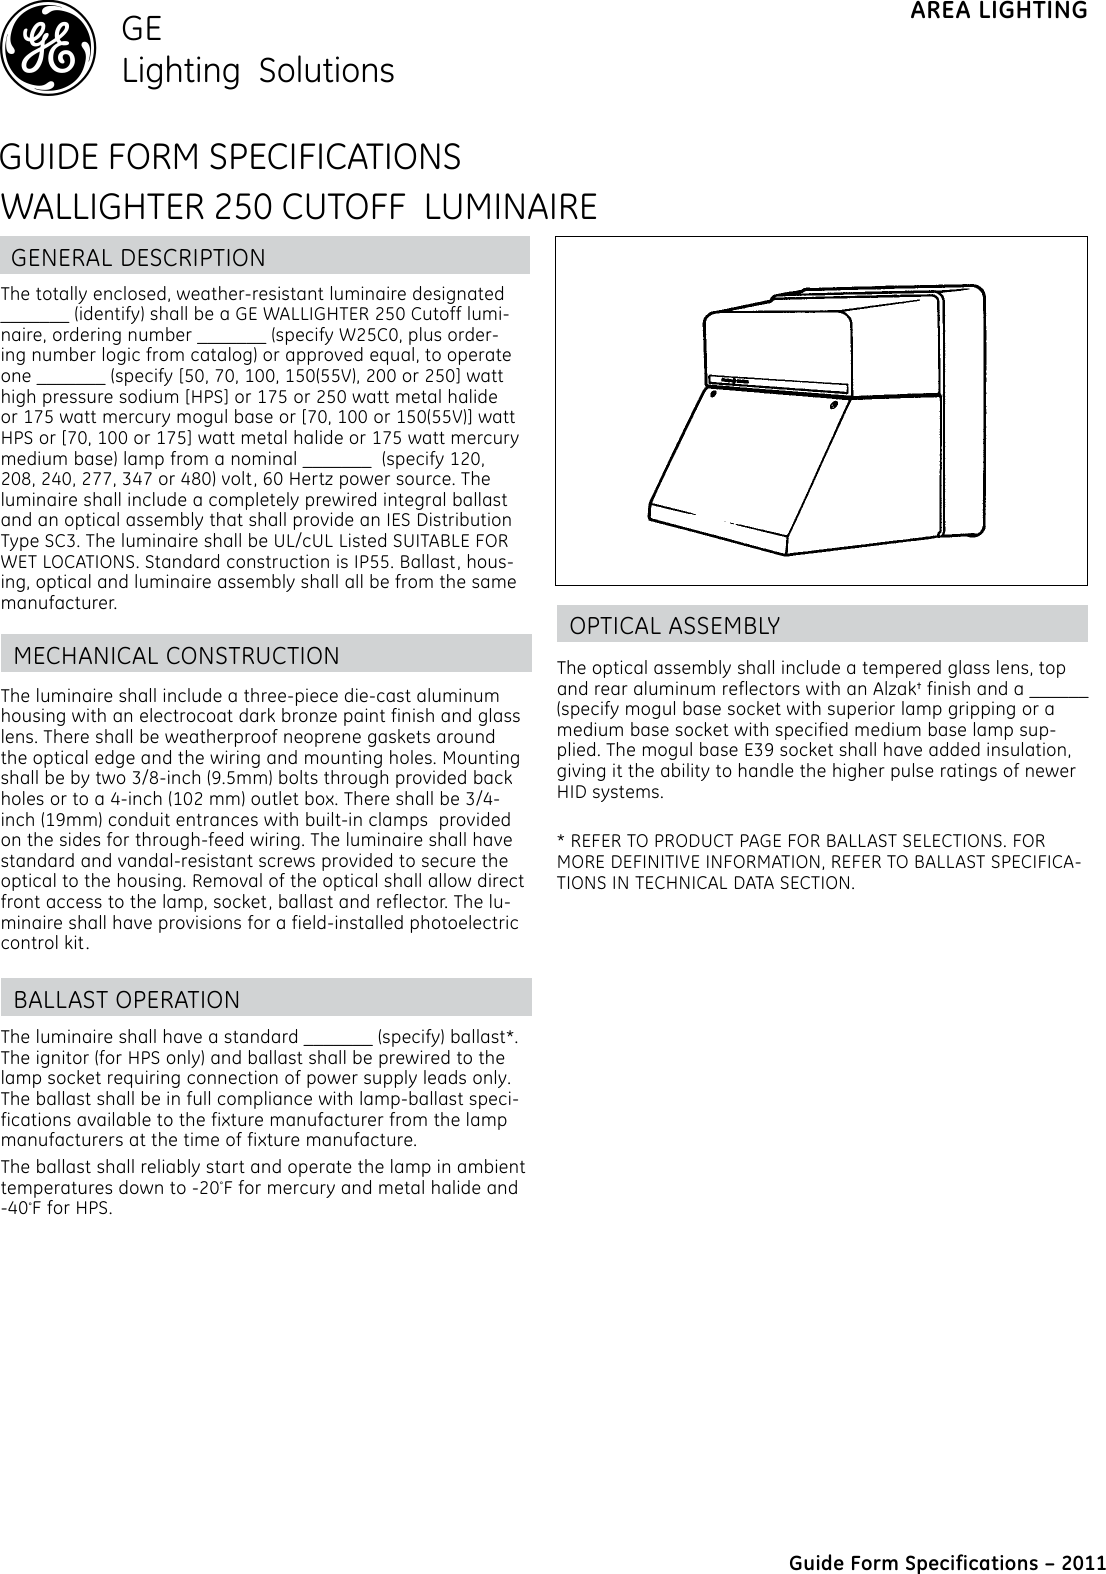 Page 1 of 2 - Ge-Appliances Ge-W25C-Specification-Sheet- GE Outdoor Area Lighting Wallighter 250 Cutoff Luminaire Spec Sheet |  Ge-w25c-specification-sheet